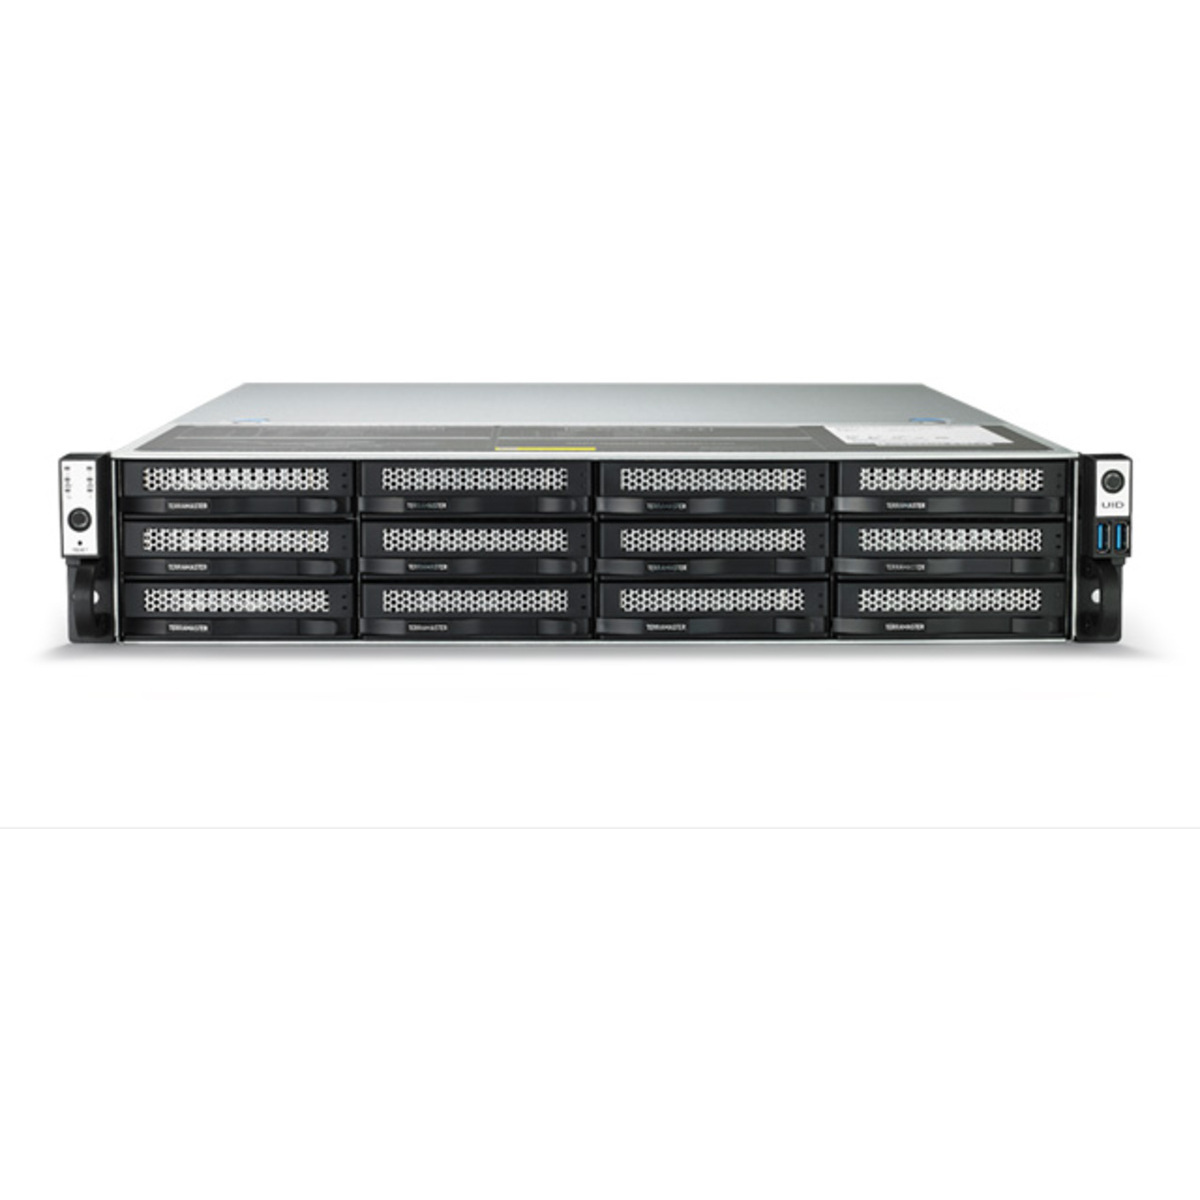 TerraMaster U12-722-2224 80tb 12-Bay RackMount Large Business / Enterprise NAS - Network Attached Storage Device 8x10tb Western Digital Red Pro WD102KFBX 3.5 7200rpm SATA 6Gb/s HDD NAS Class Drives Installed - Burn-In Tested U12-722-2224